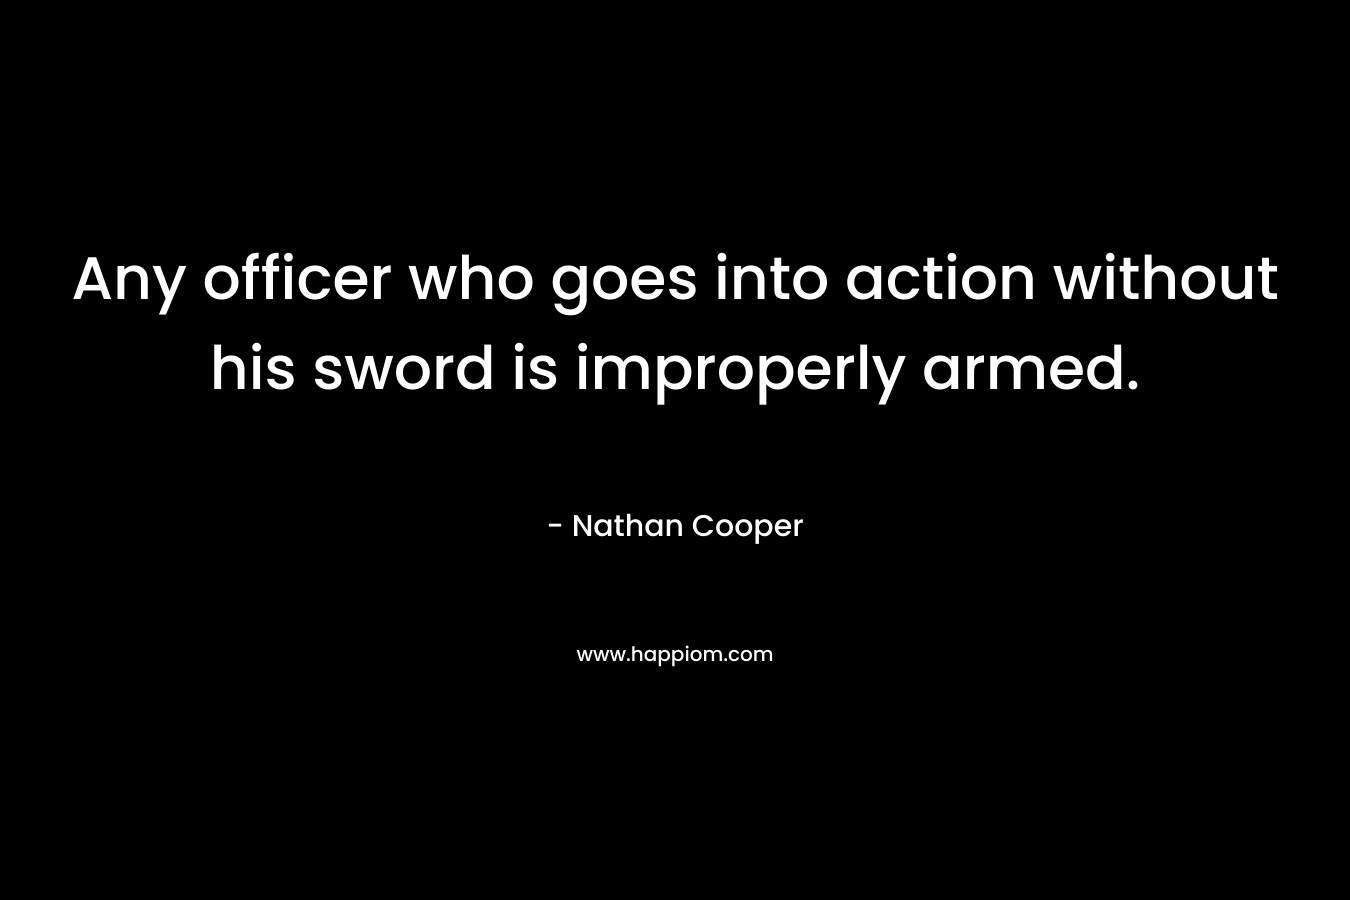 Any officer who goes into action without his sword is improperly armed. – Nathan Cooper